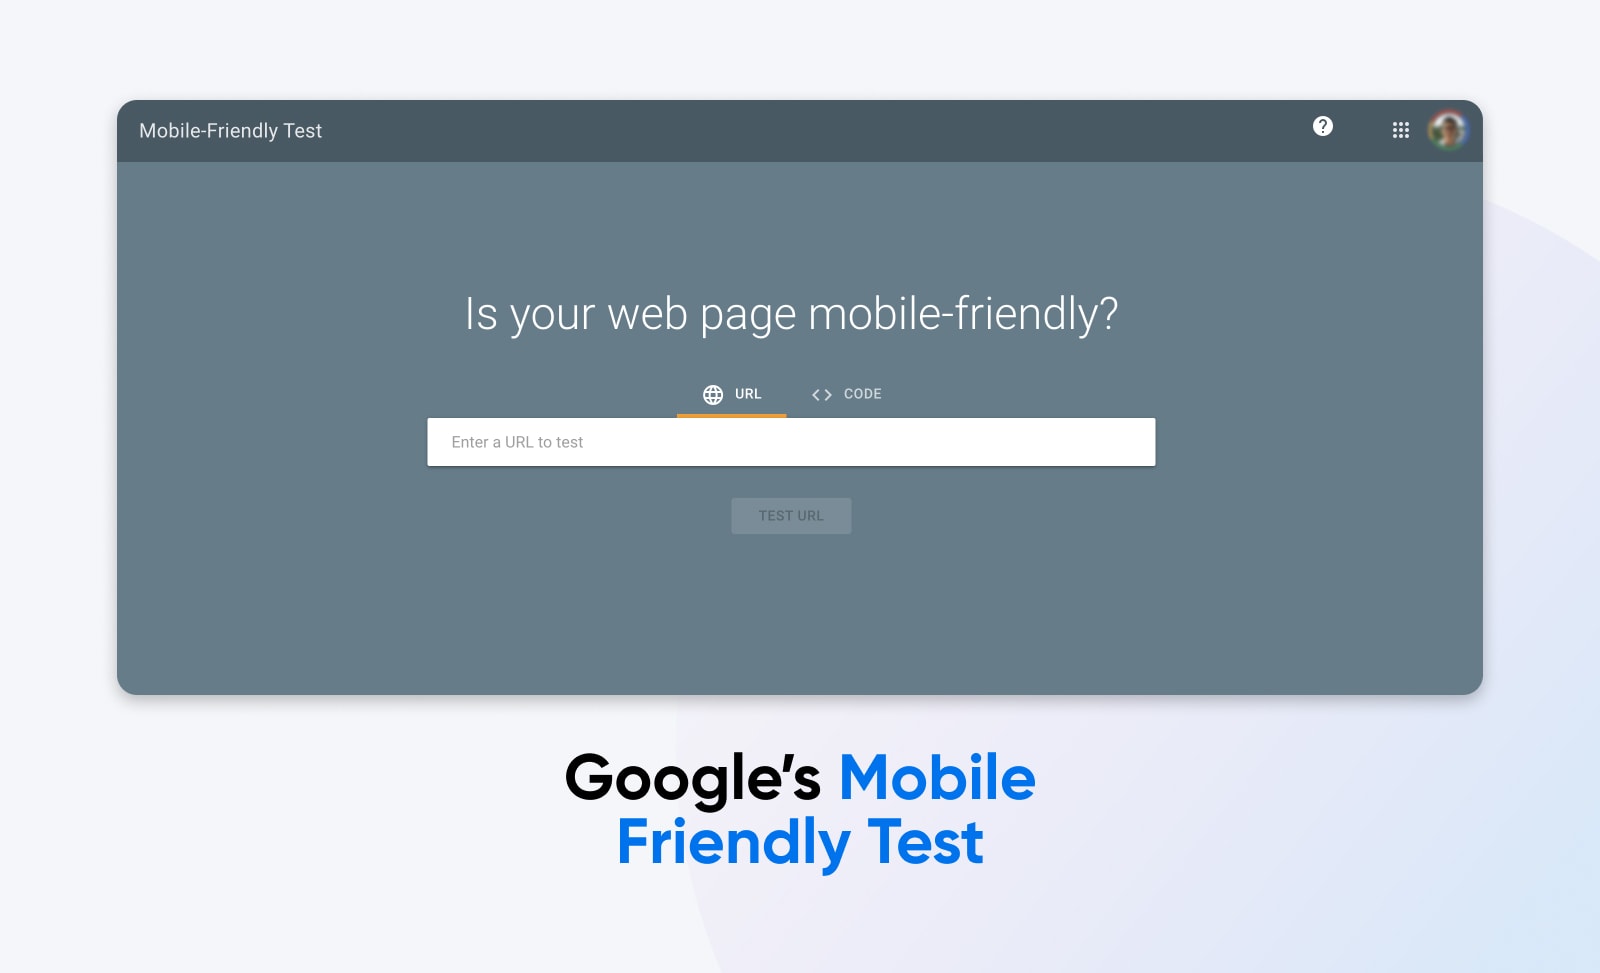 Google’s Mobile-Friendly Test tool